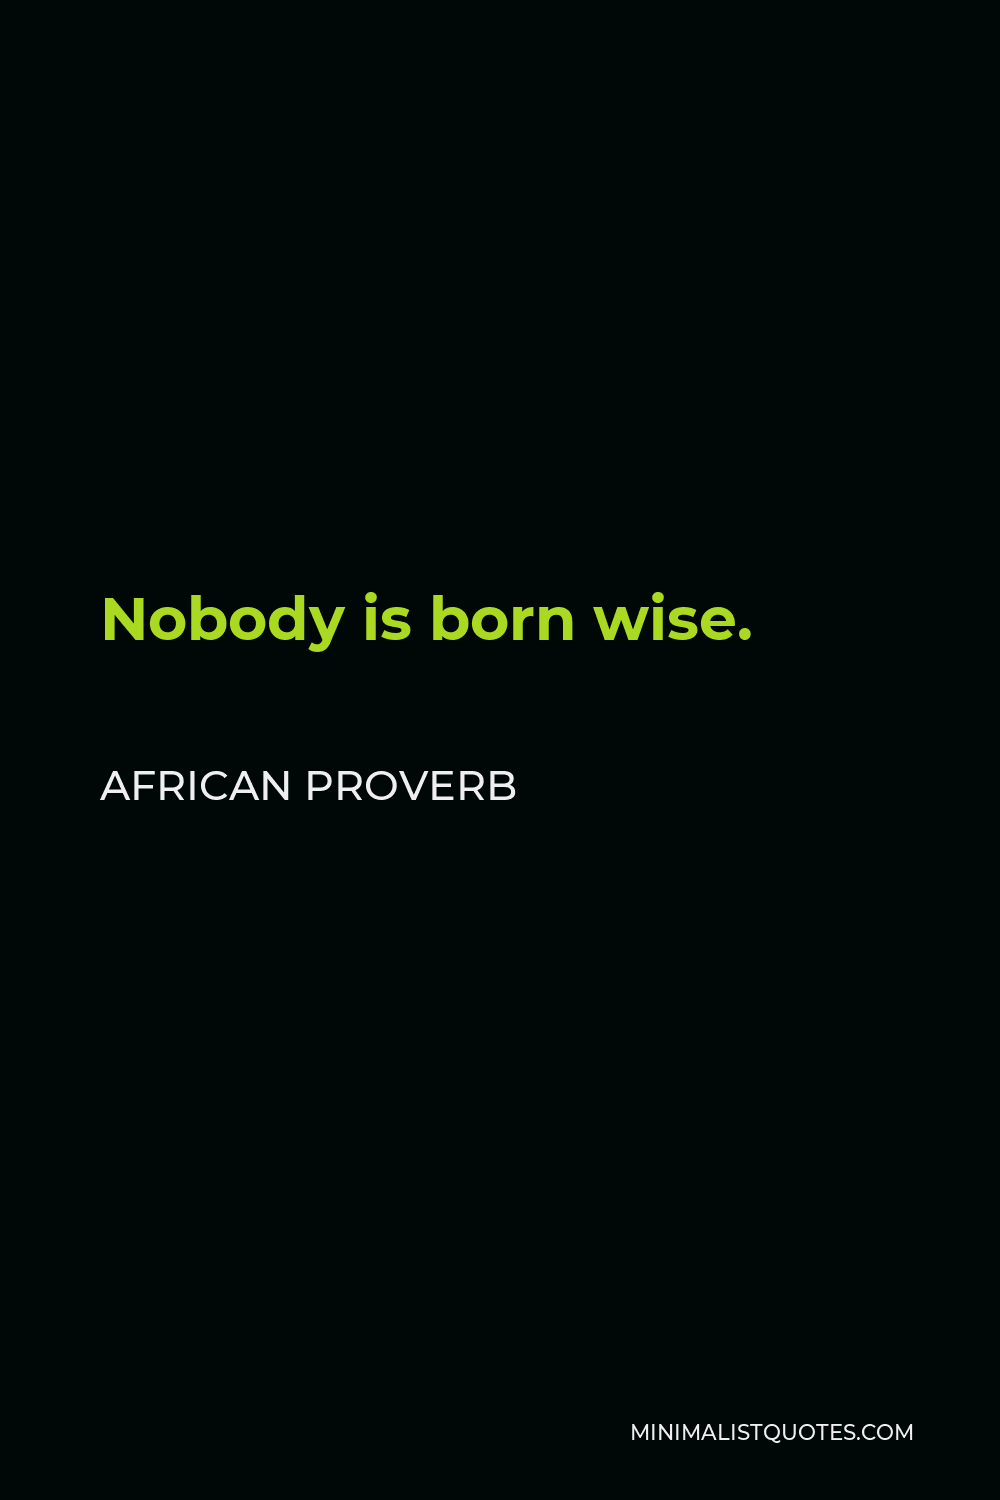 African Proverb Quote - Nobody is born wise.